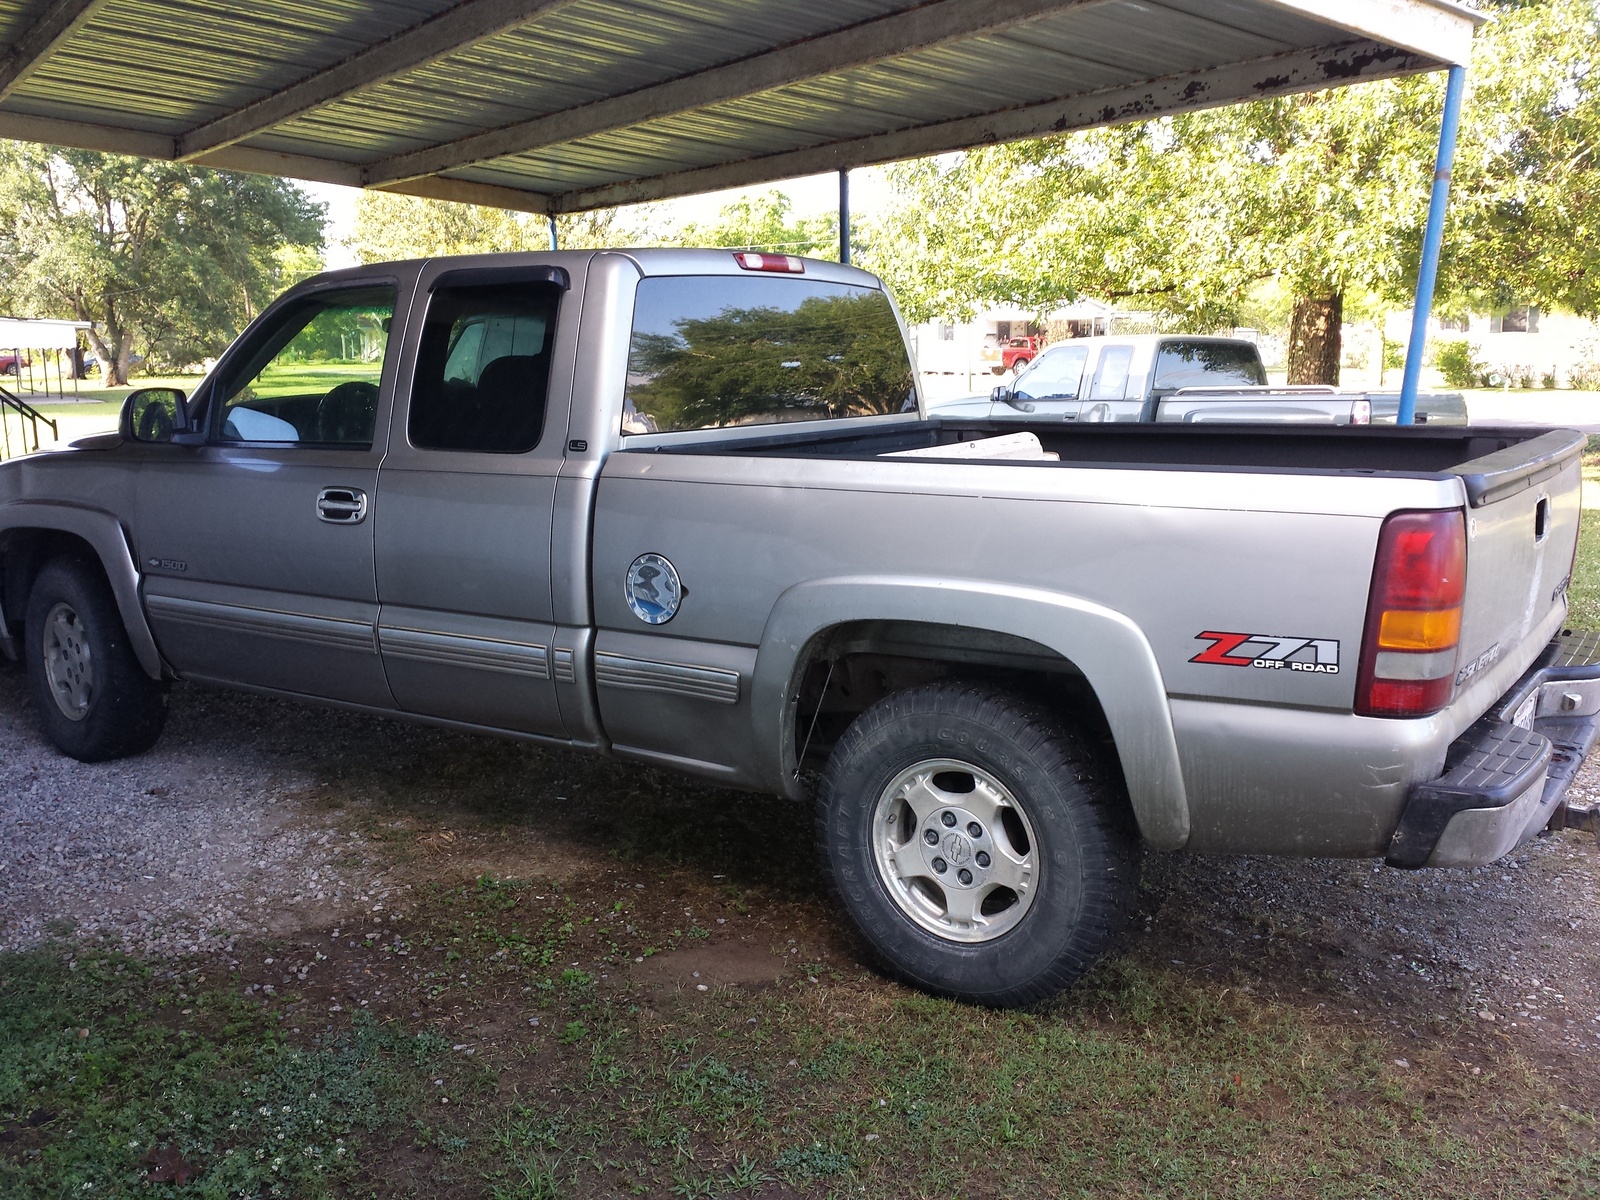 Used toyota trucks for sale in lake charles